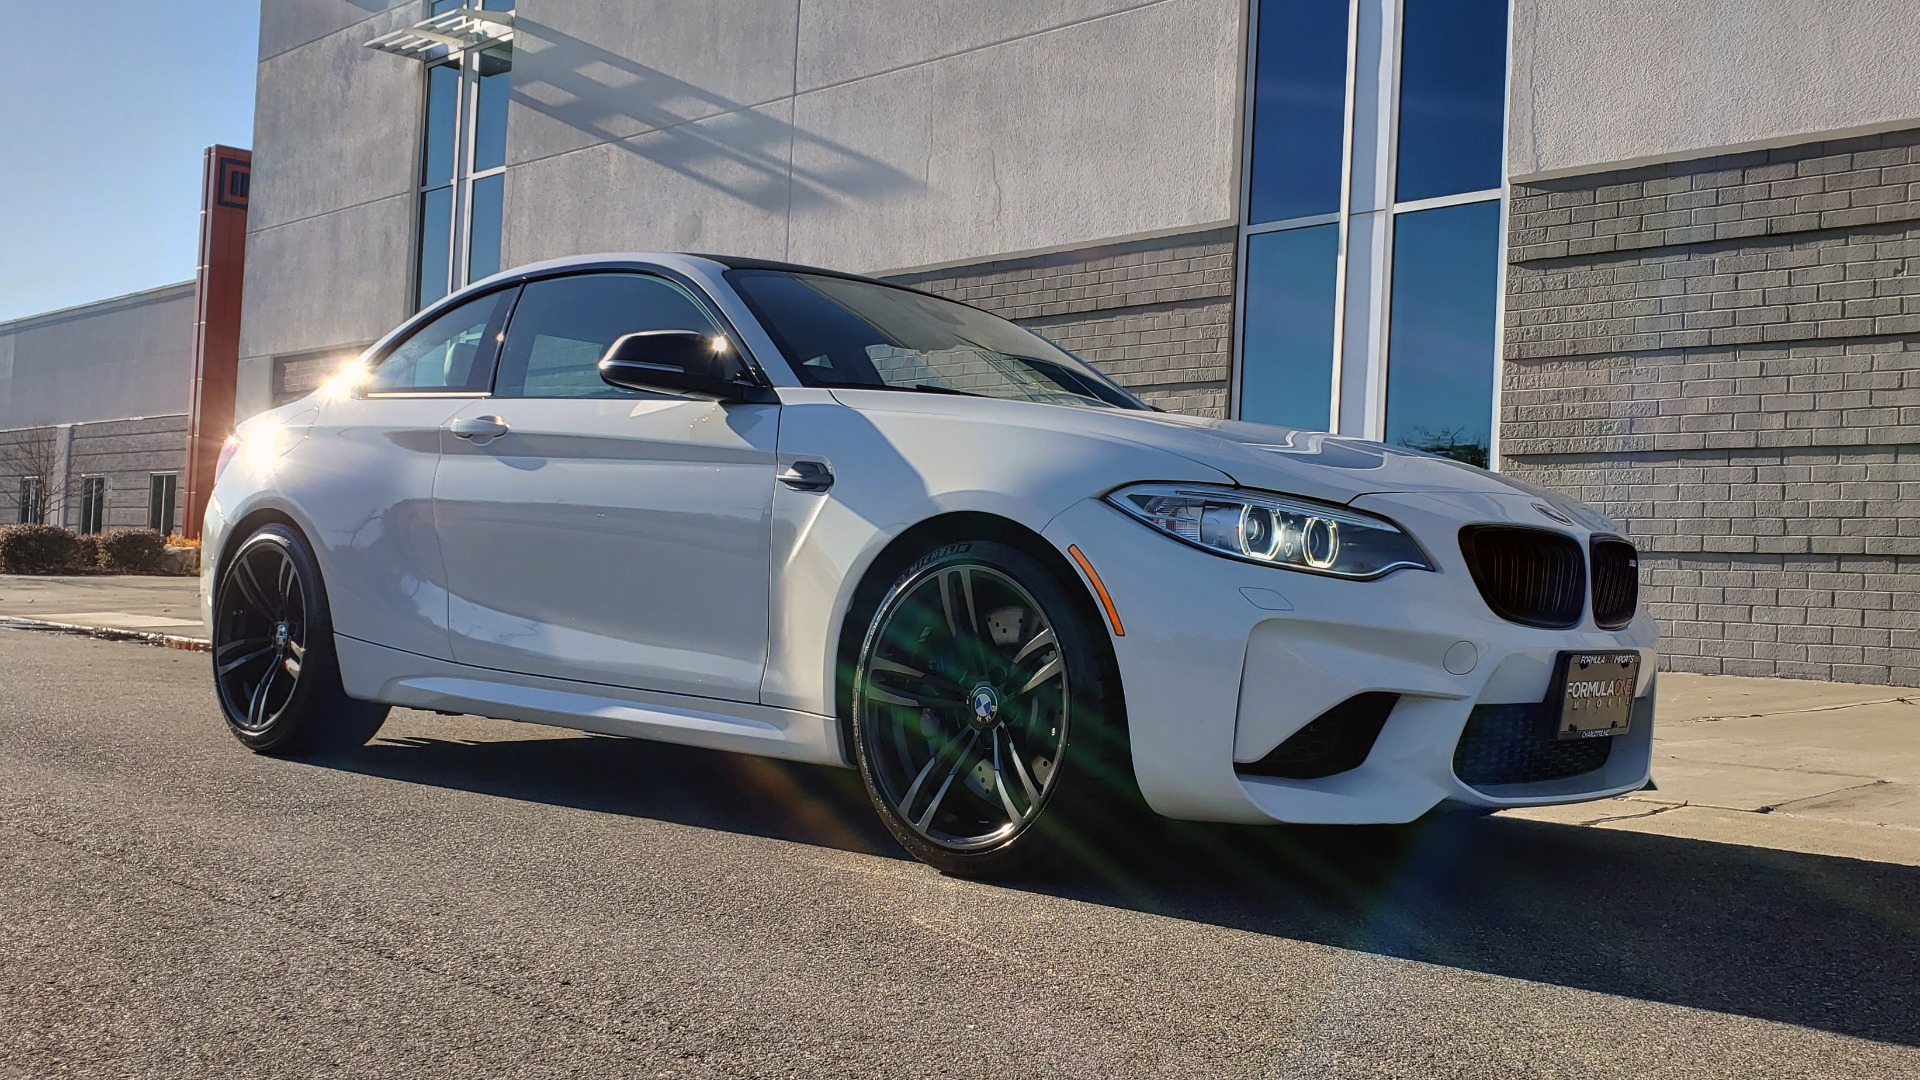 Used 2017 BMW M2 COUPE / MANUAL / EXEC PKG / NAV / WIFI / PDC / REARVIEW for sale Sold at Formula Imports in Charlotte NC 28227 9